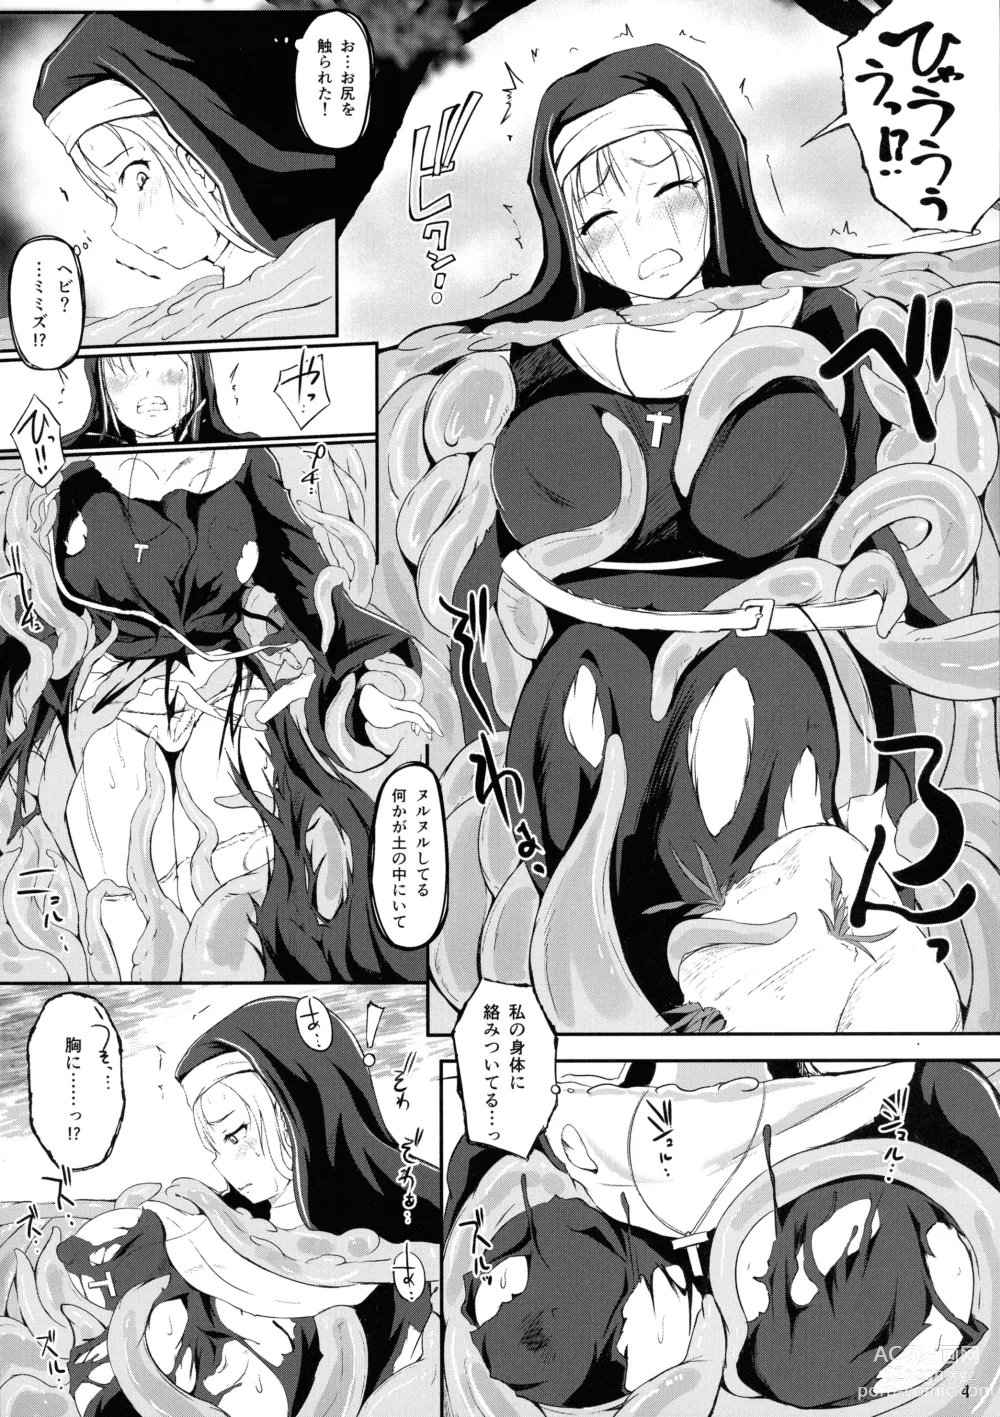 Page 6 of doujinshi Grope Trap Nepenthes